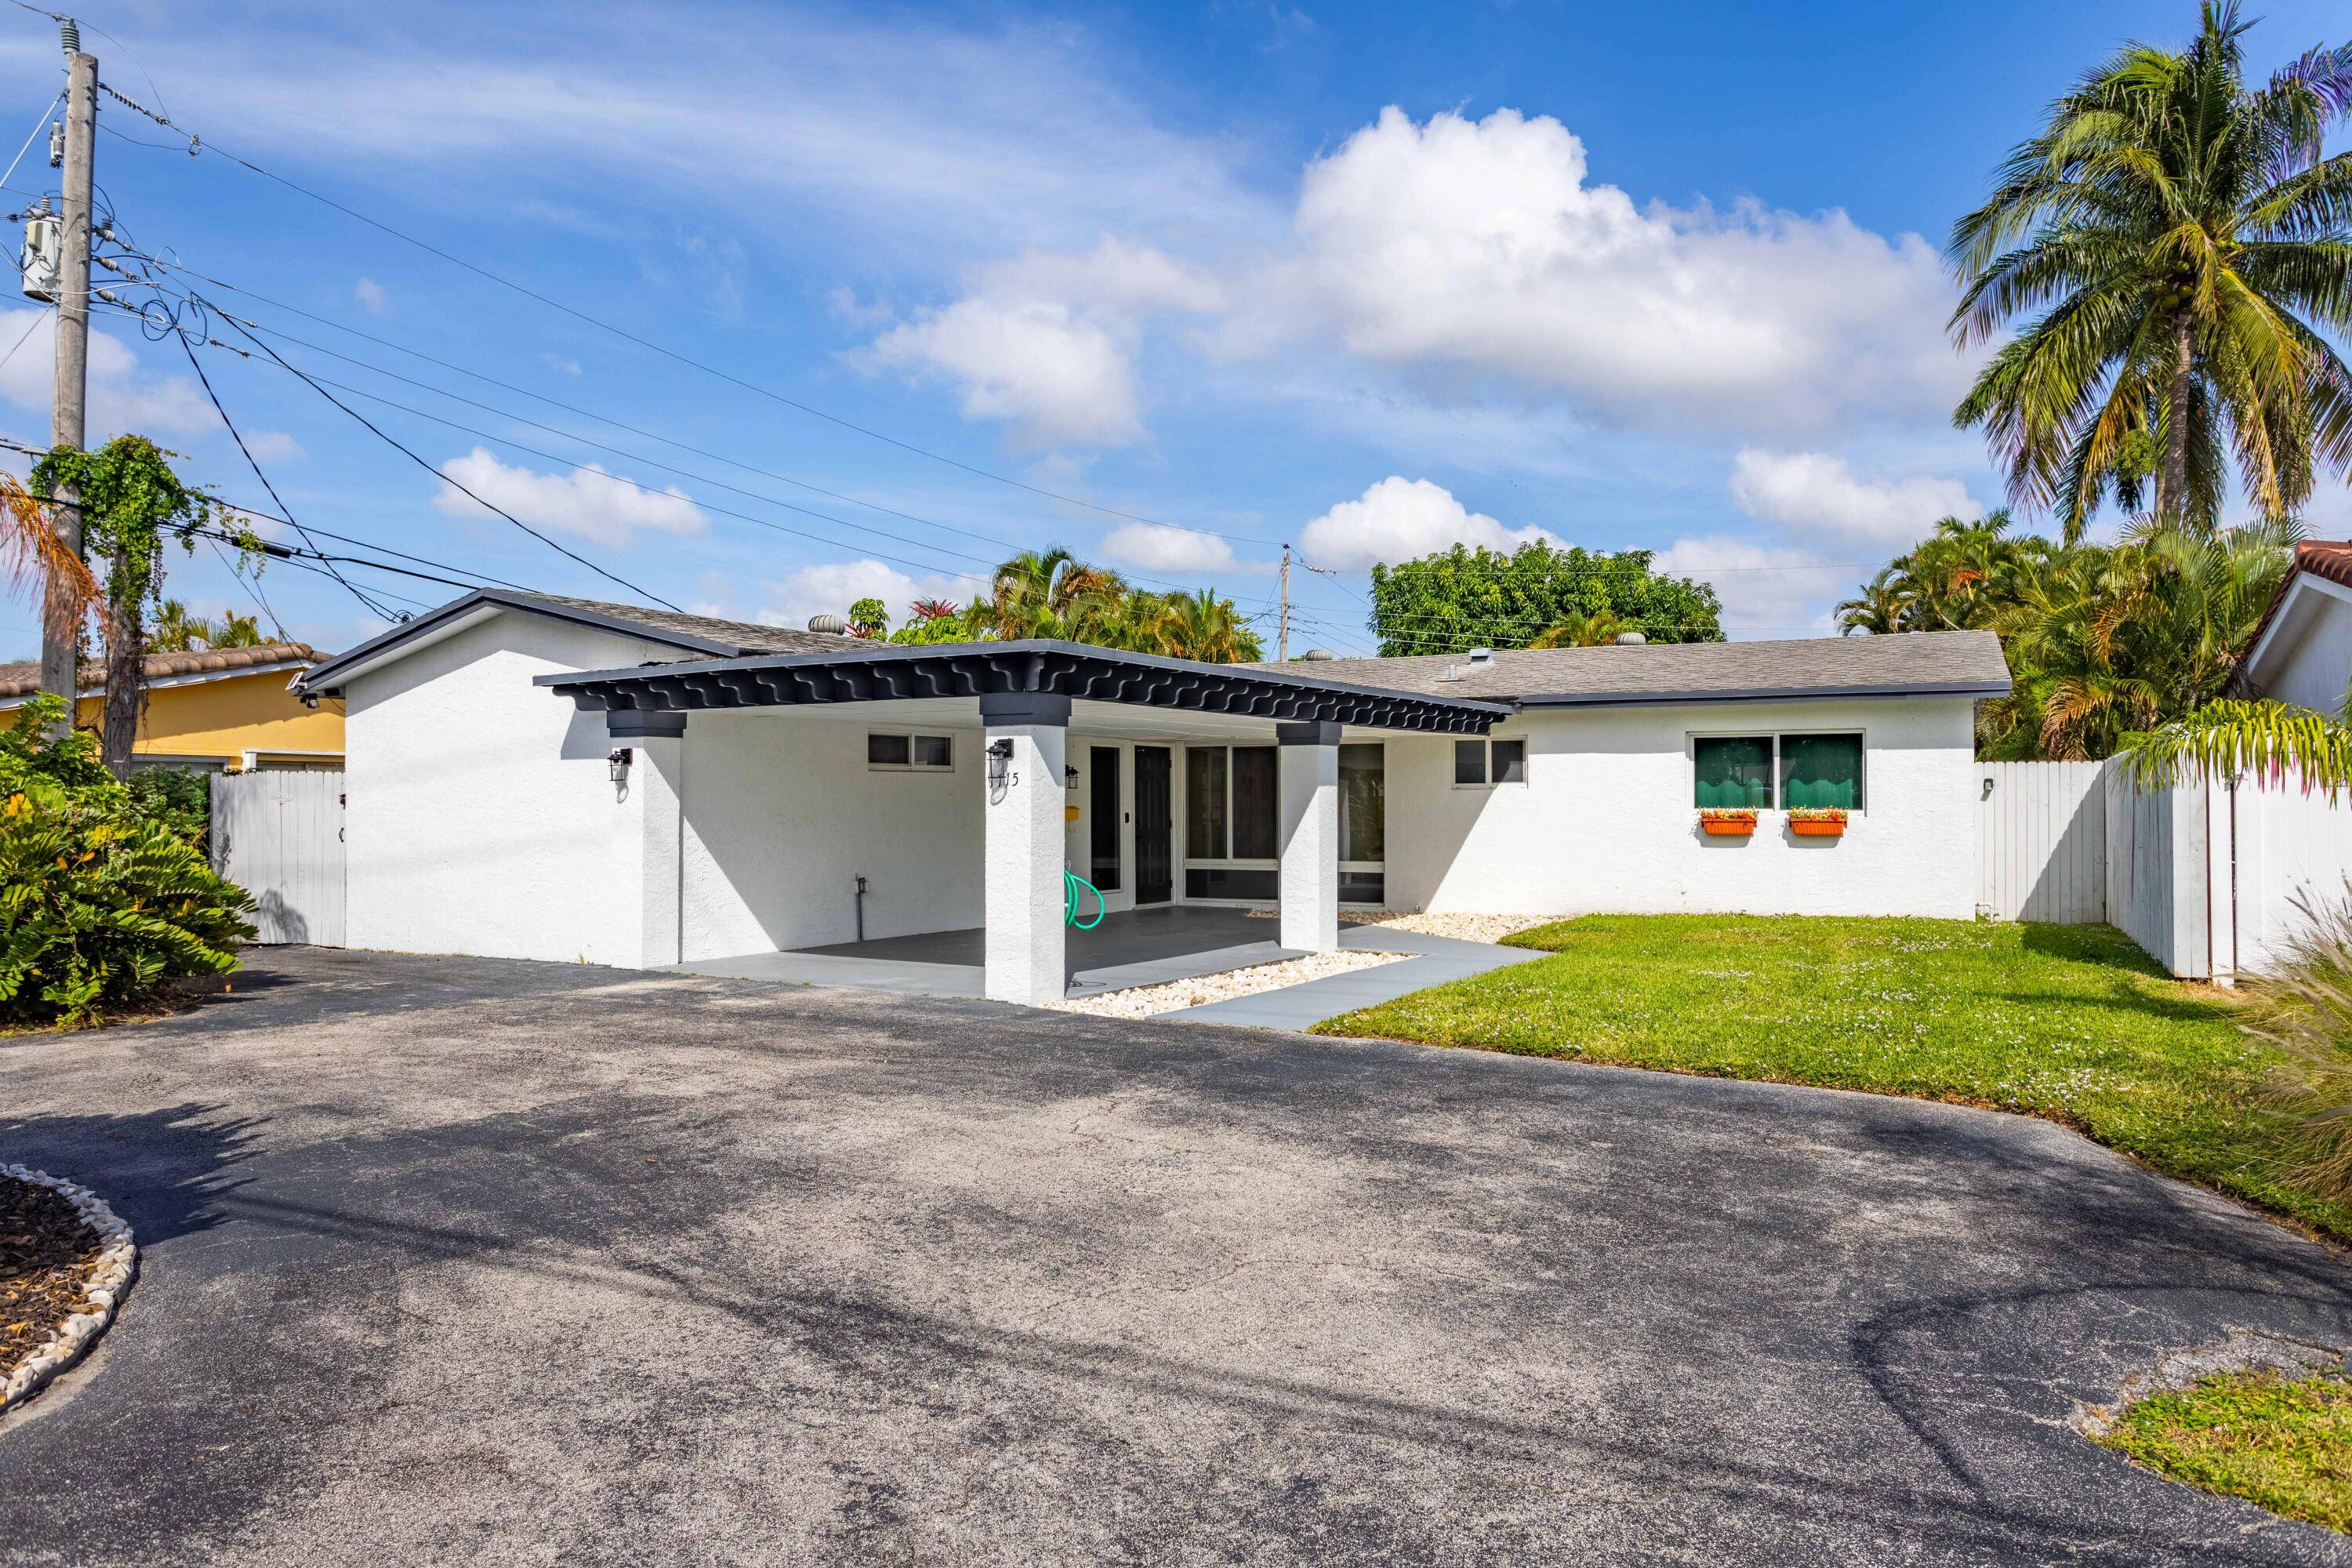 Welcome home to a fantastic neighborhood in Oakland Park, featuring a beautiful single family home in the heart of Fort Lauderdale, offering a mix of suburban comfort and urban conveniences.